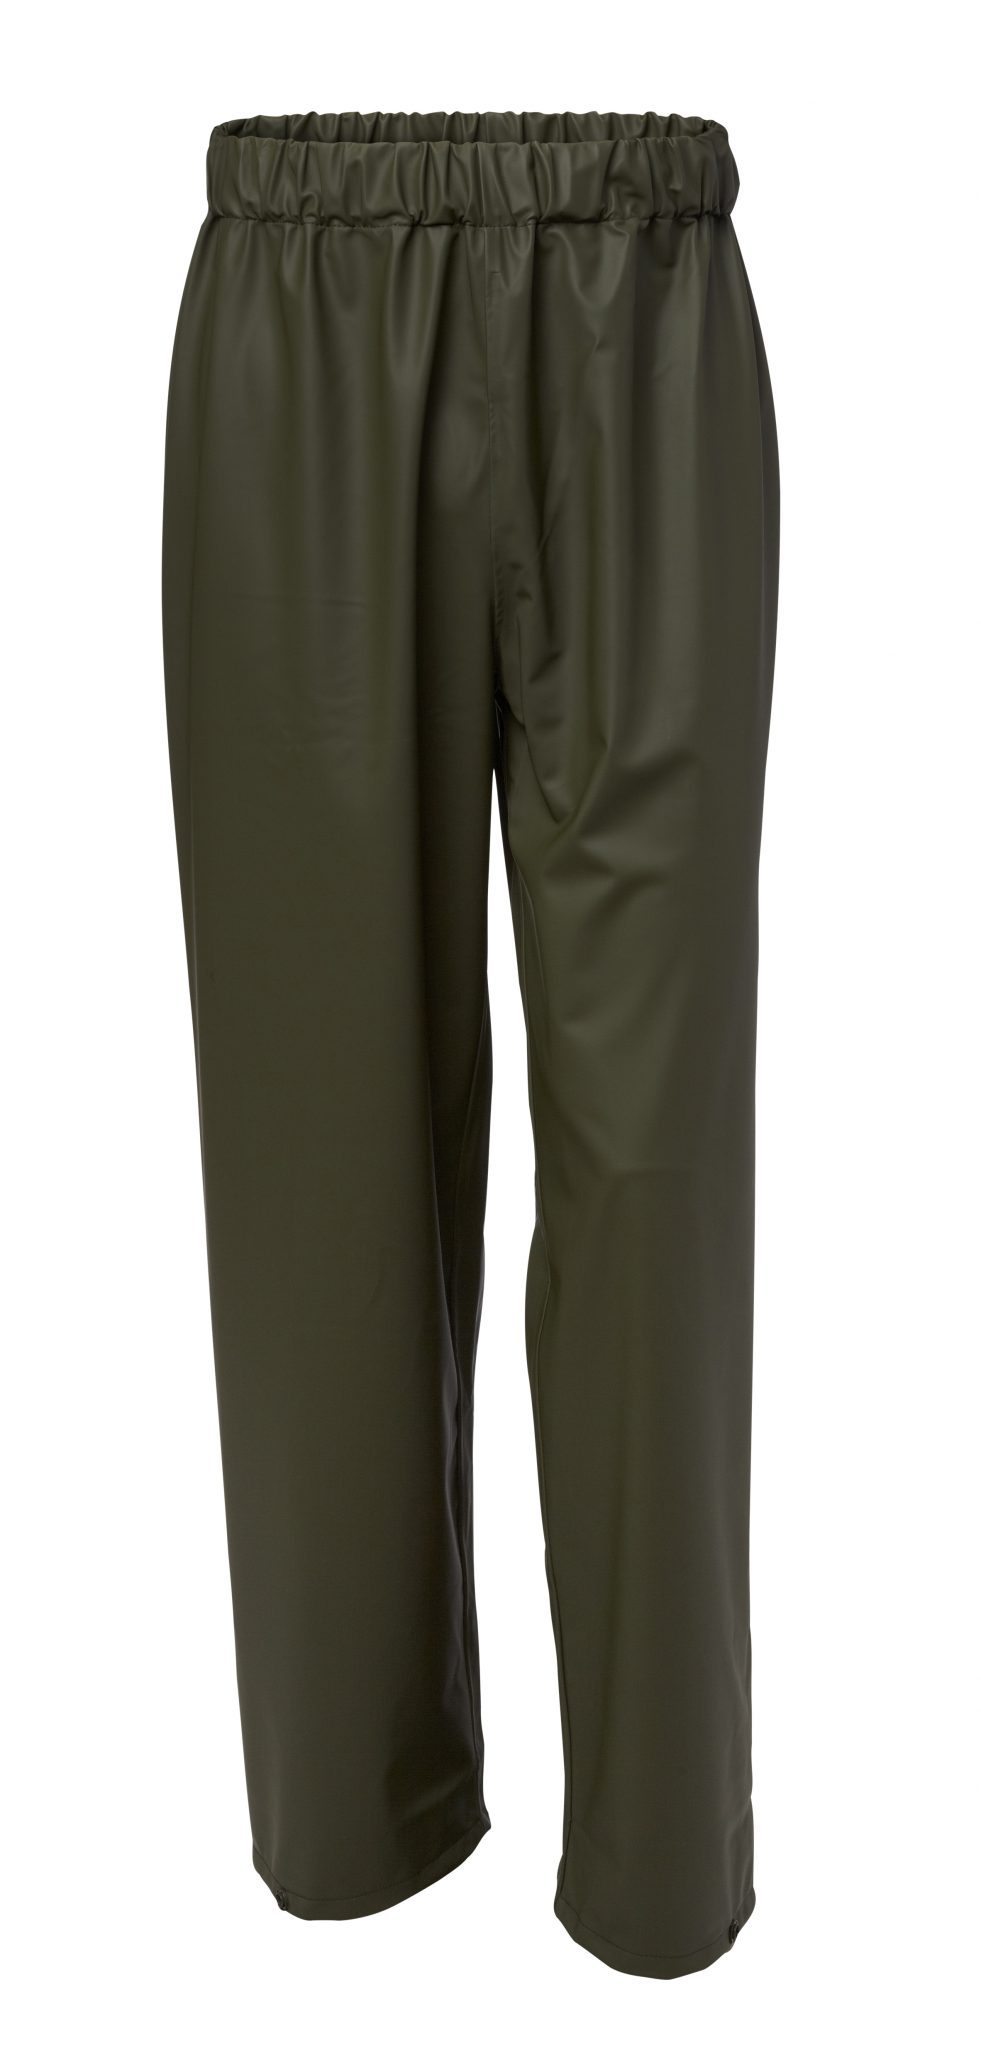 Seeland Crieff Overtrousers Unisex Size XS & XXL 